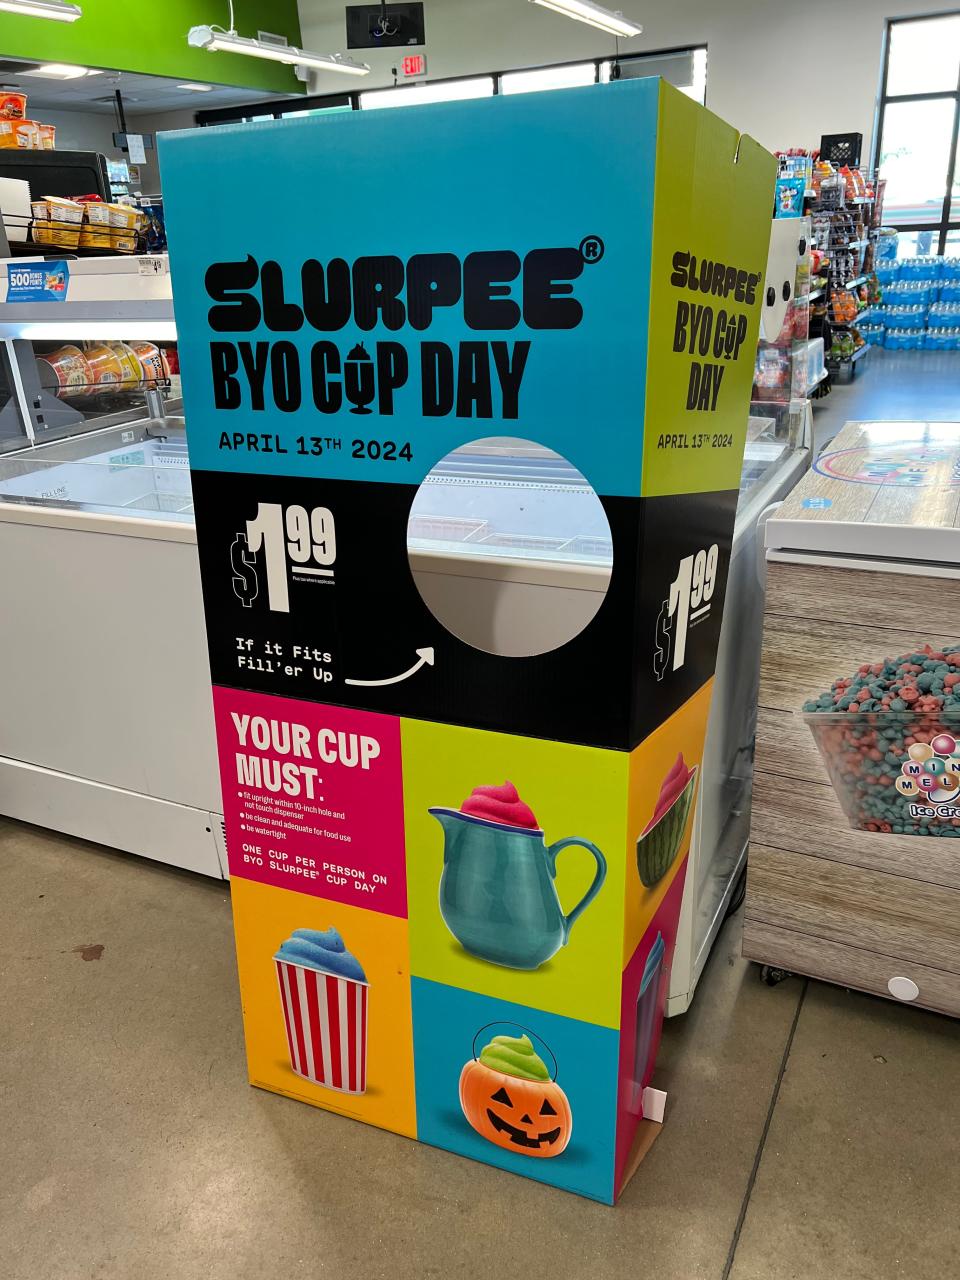 In 7-Eleven's Bring Your Own Cup day, you decide what can be a cup (as long as it fits under the nozzle).